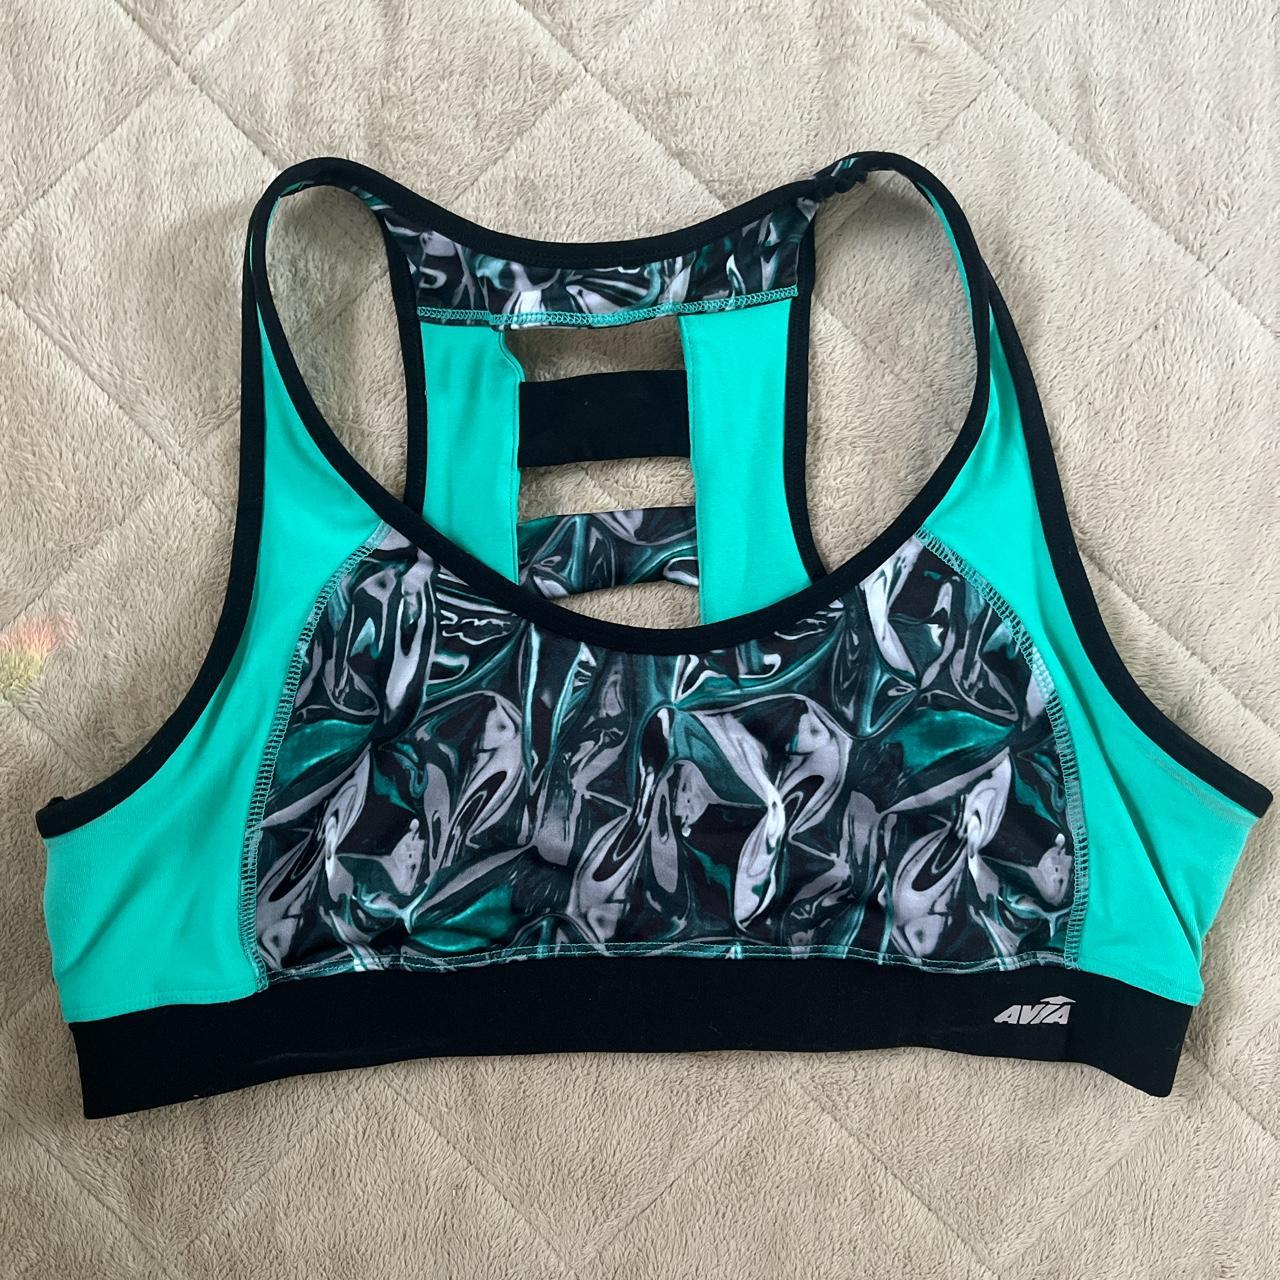 Avia bra top!! size m worn once, no flaws, in great - Depop